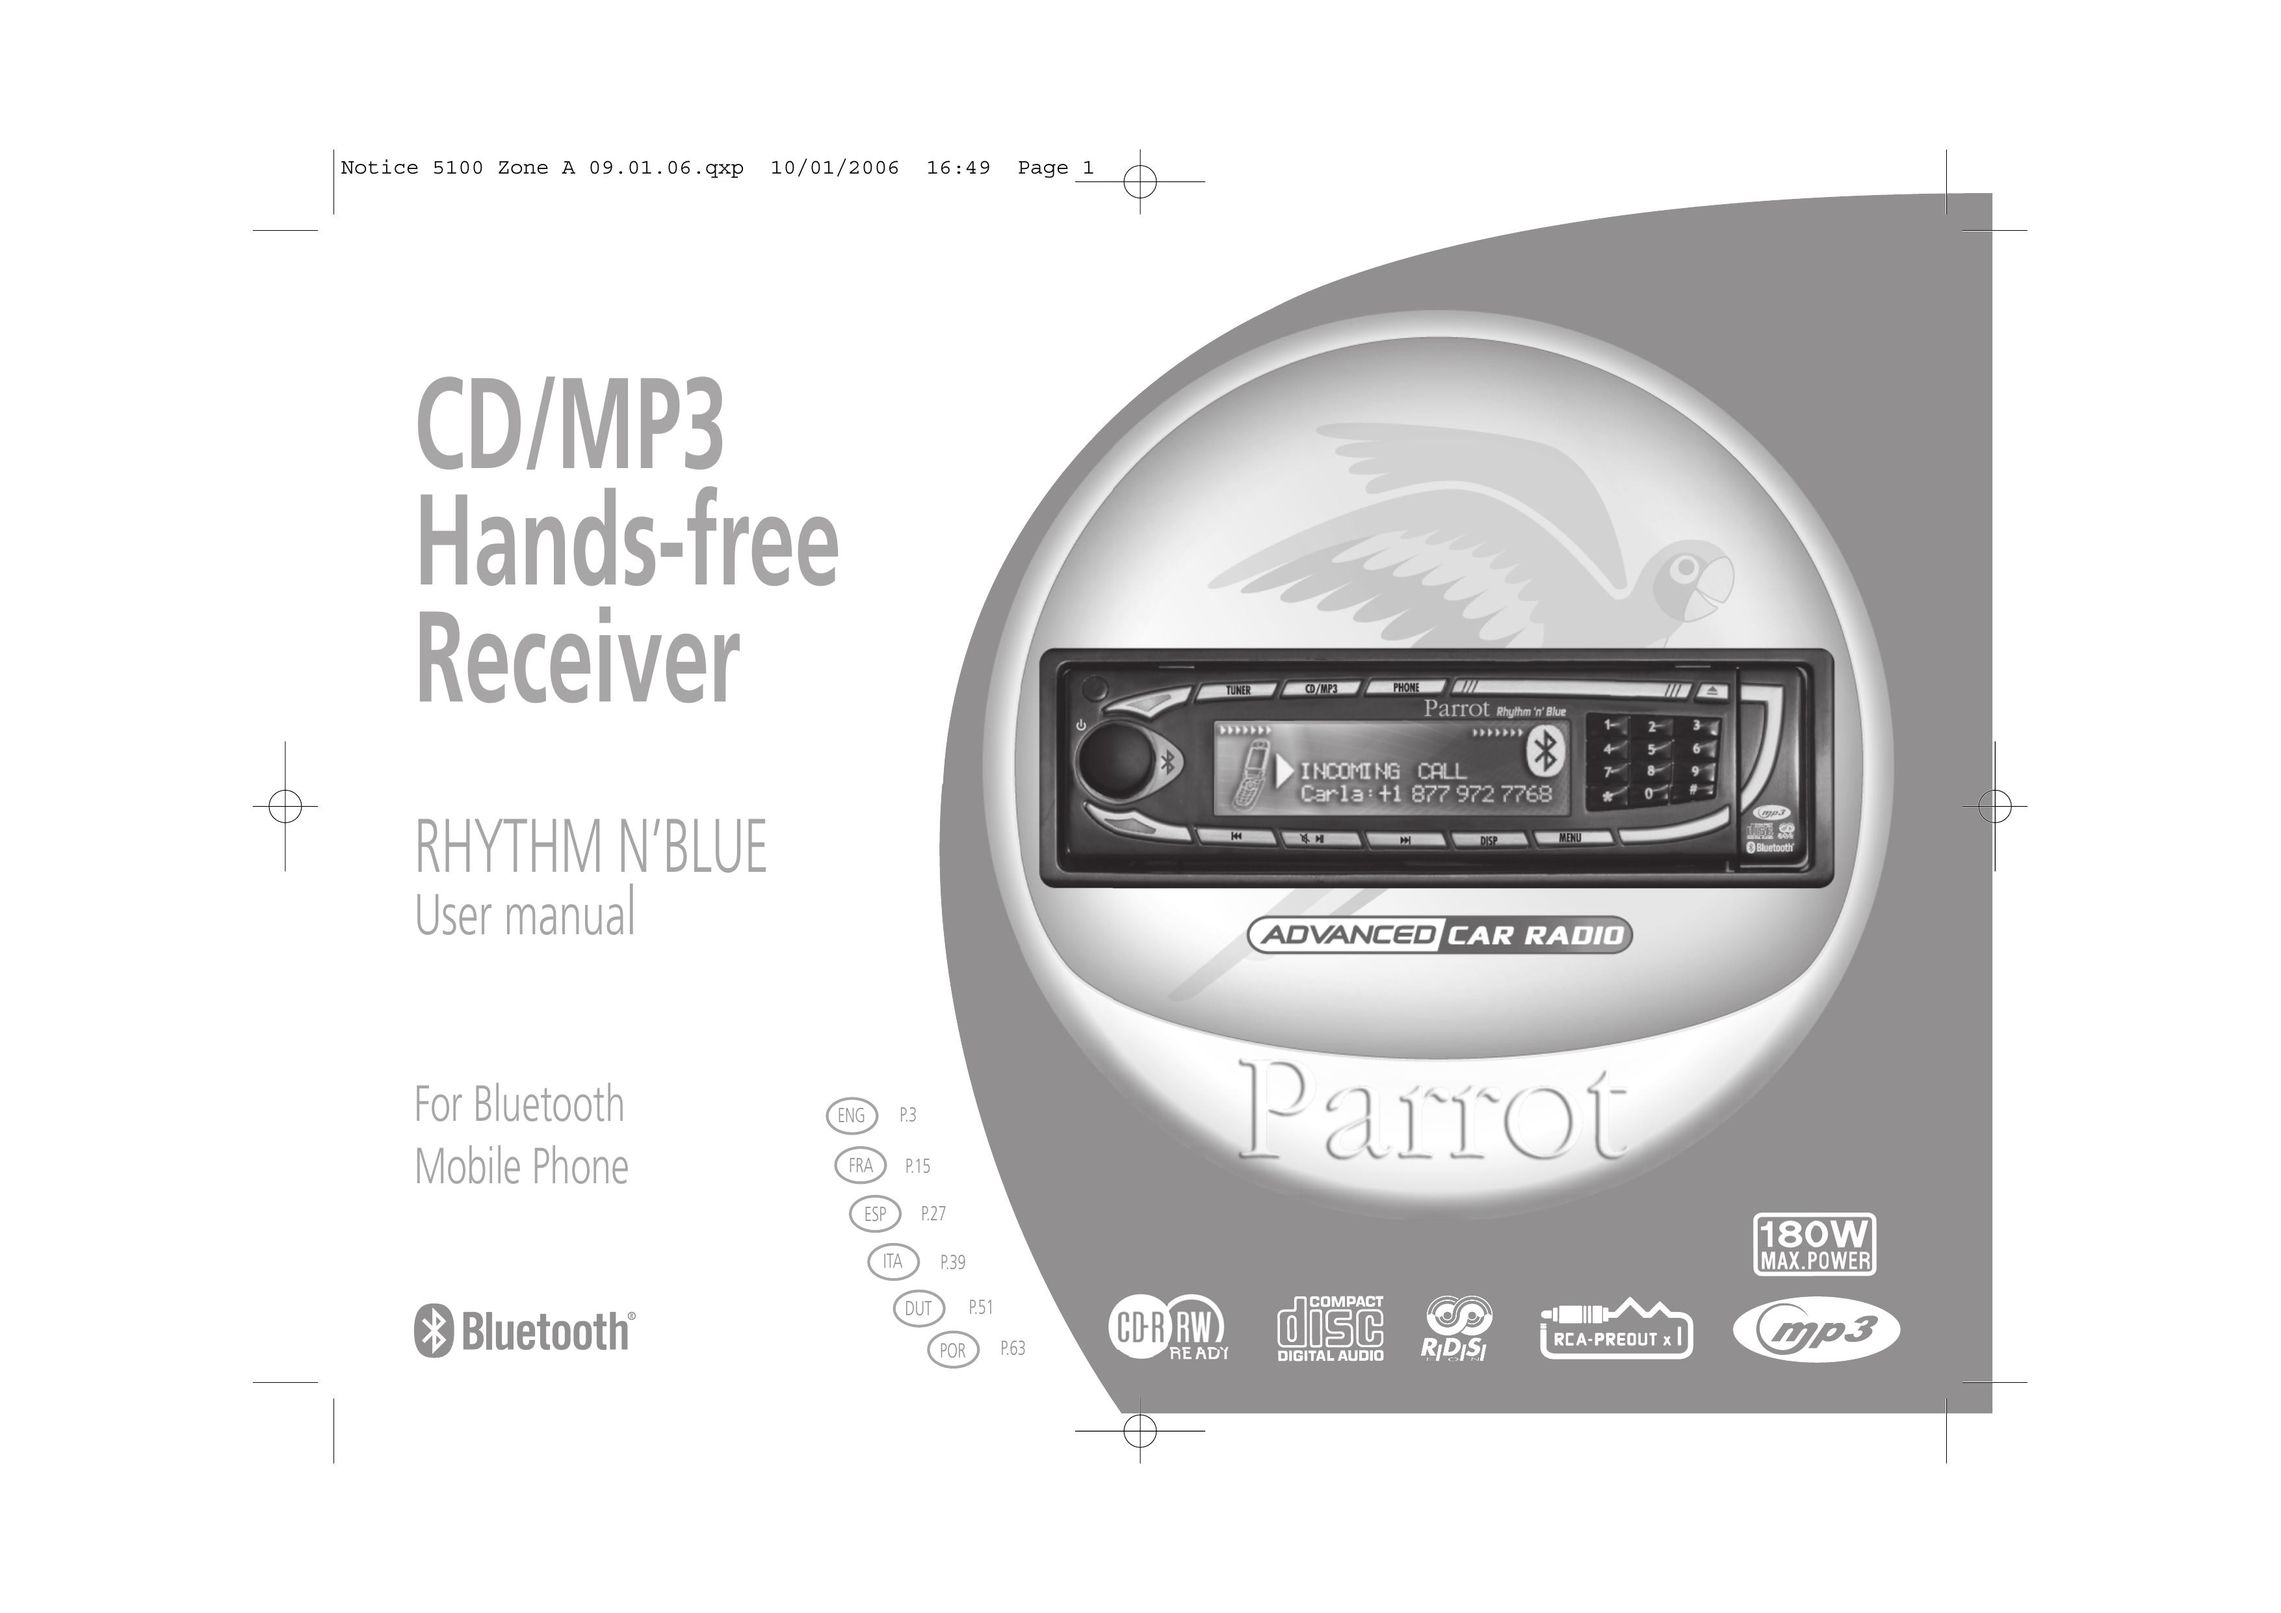 Parrot CD/MP3 Hands-free Receiver Car Stereo System User Manual